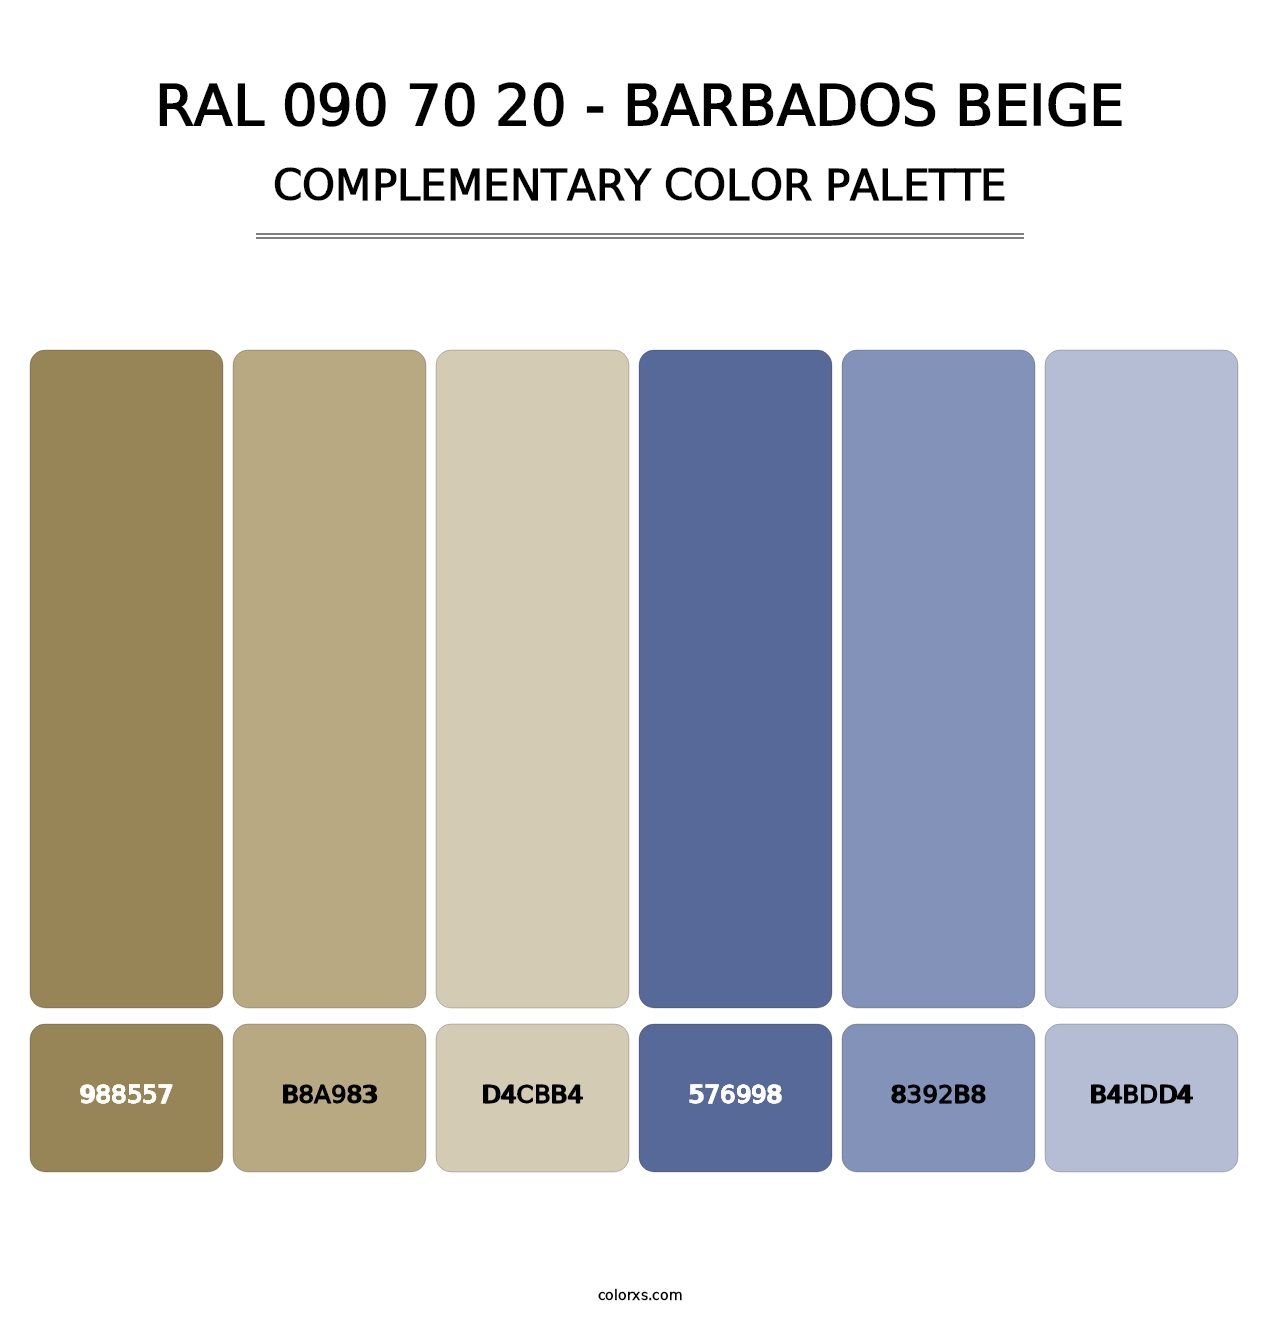 RAL 090 70 20 - Barbados Beige - Complementary Color Palette